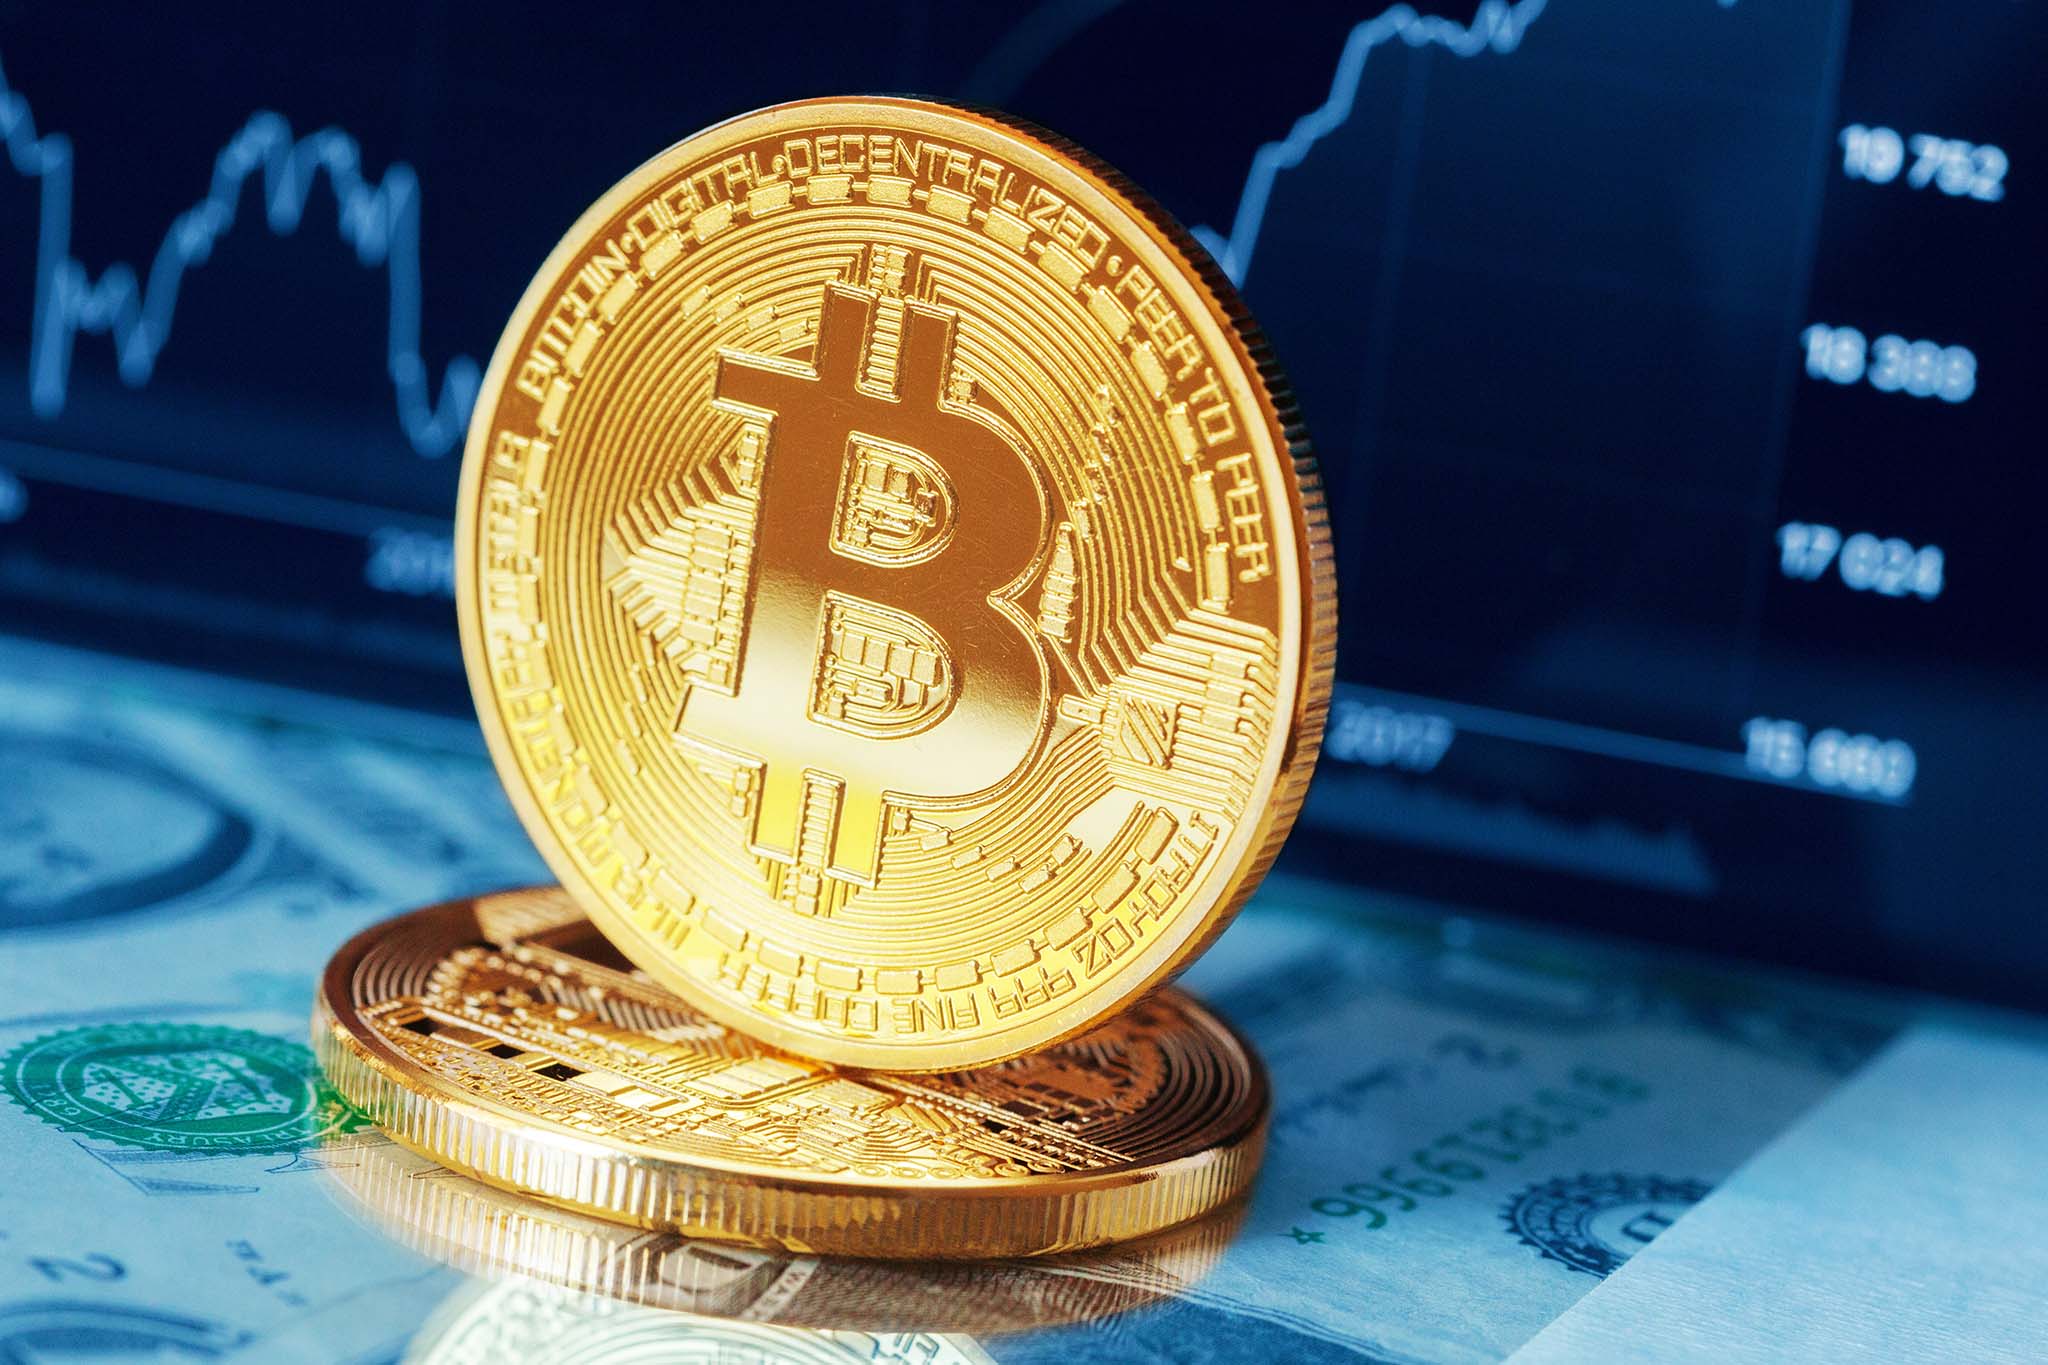 Bitcoin rate rose above $ 11 thousand, fully recovered after the March collapse